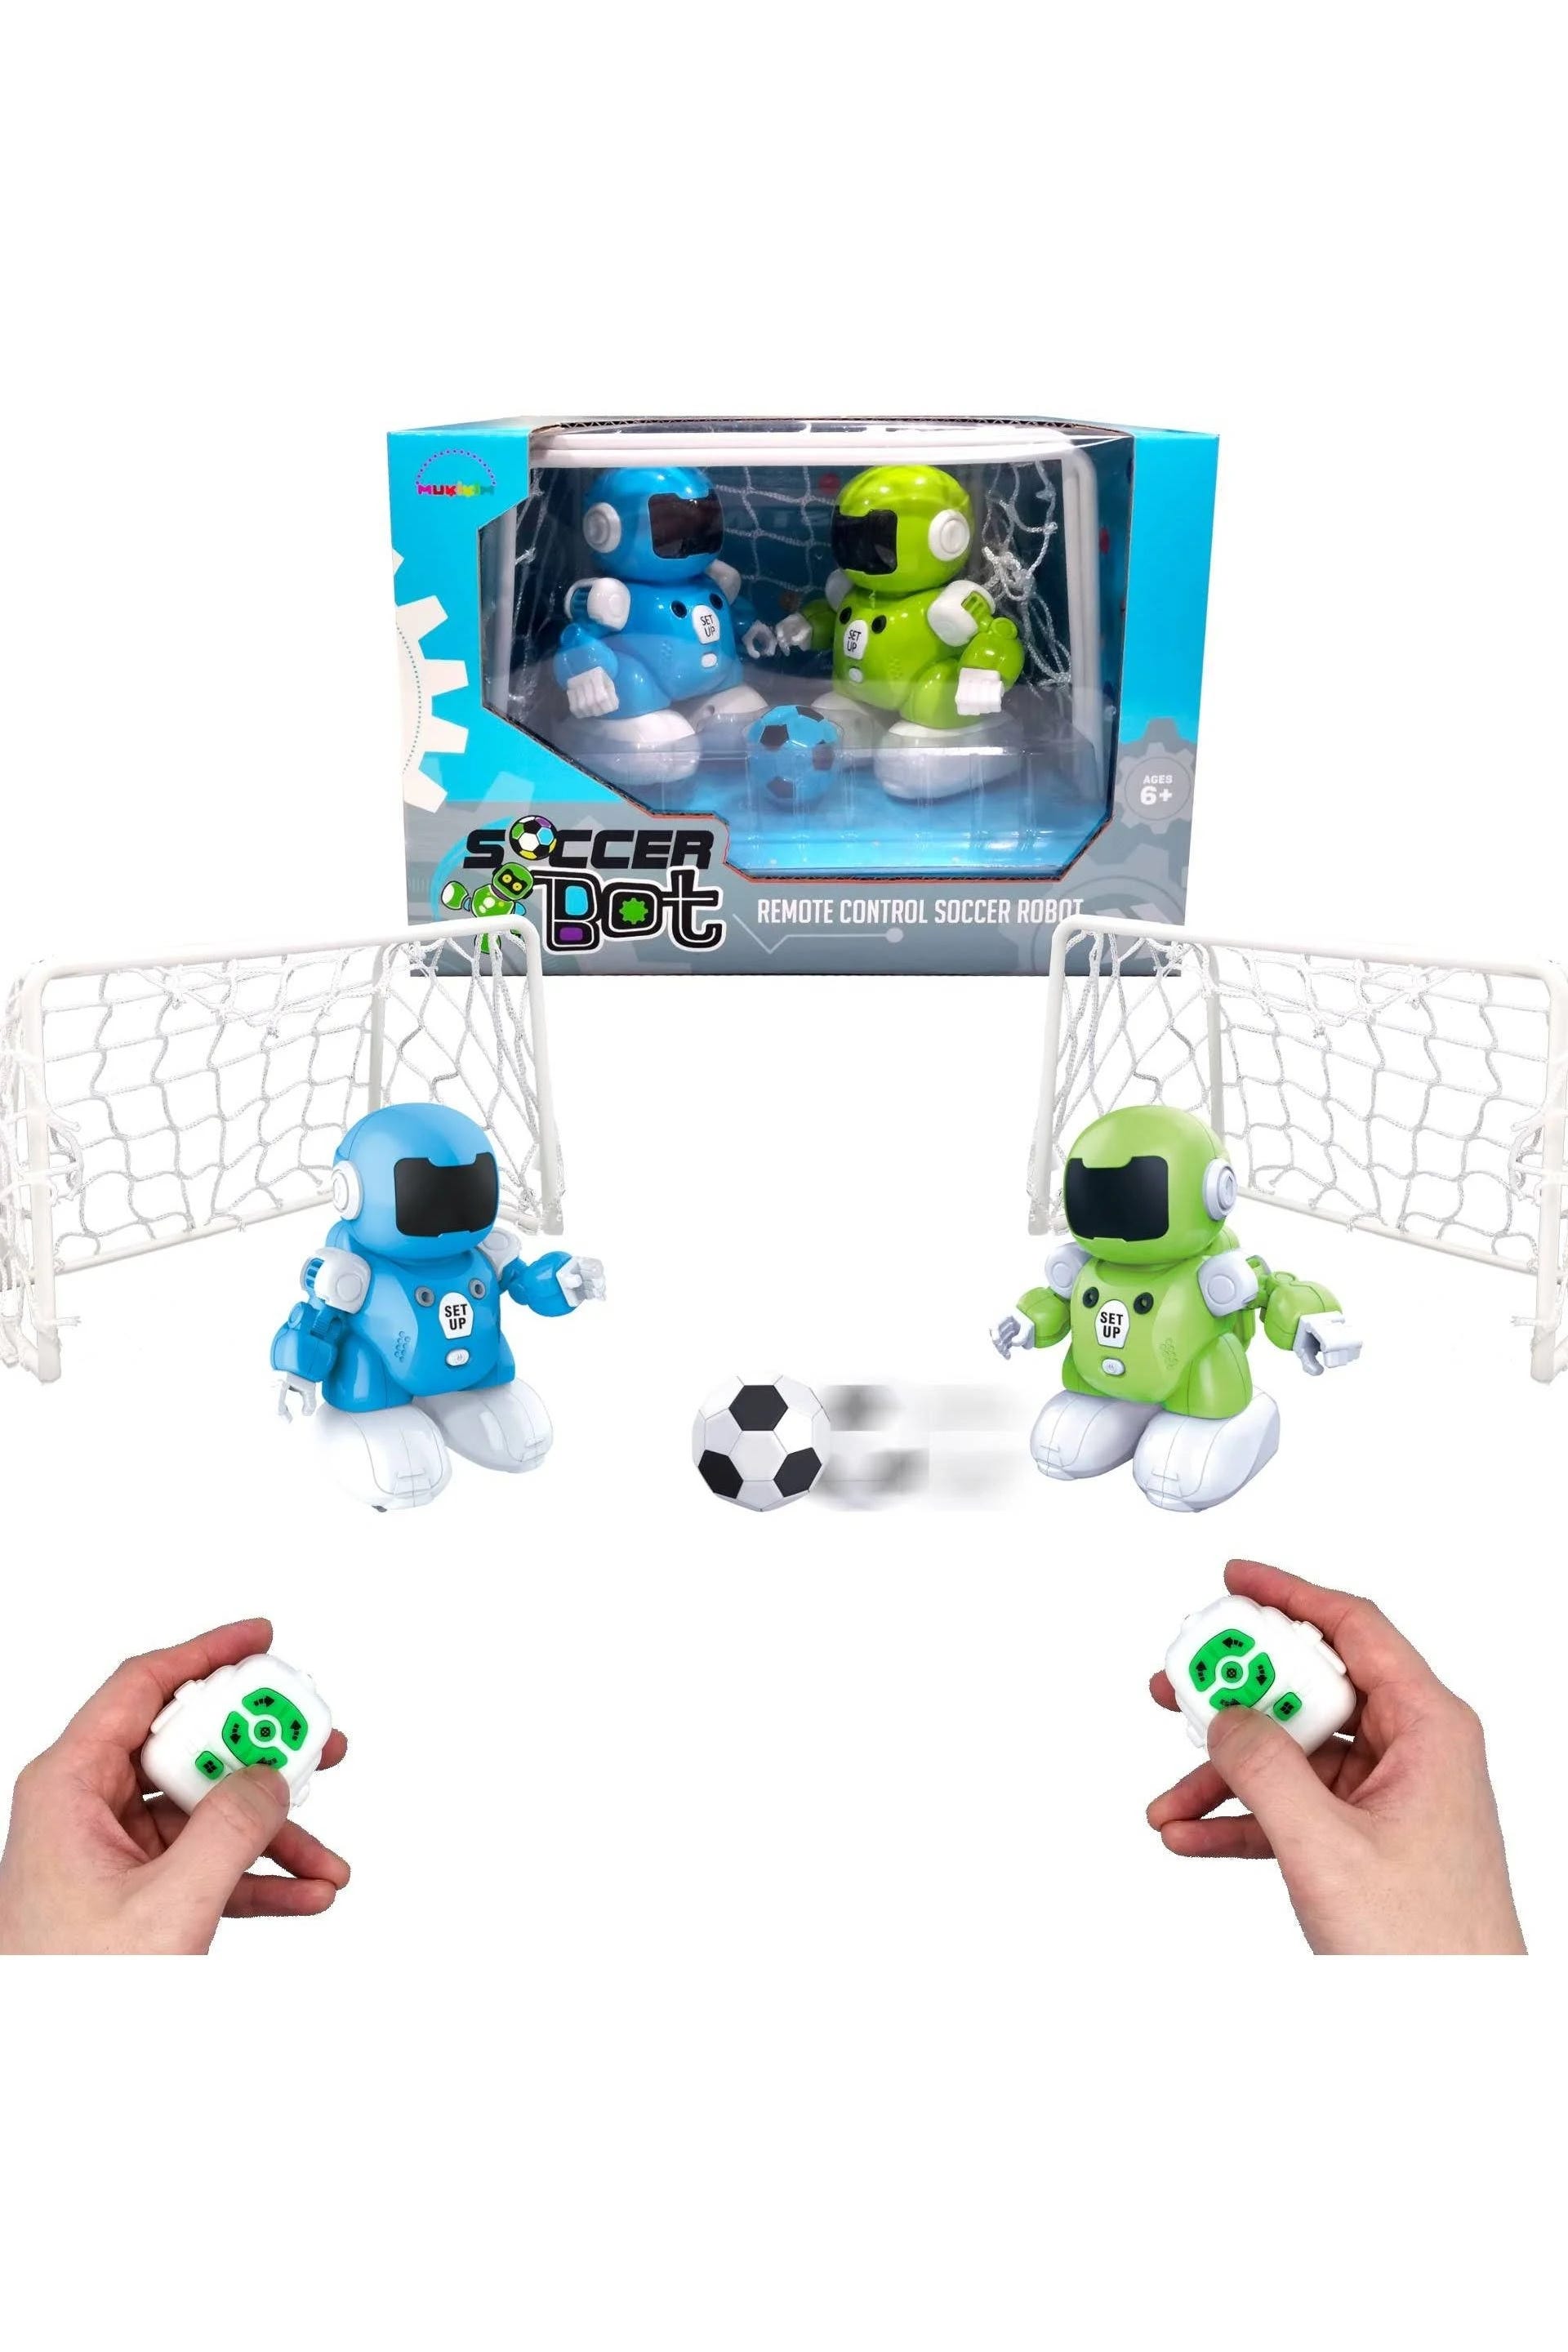 Remote-Control Soccer Robots for Kids: Learn and Play with Interactive Soccer Bots | Image